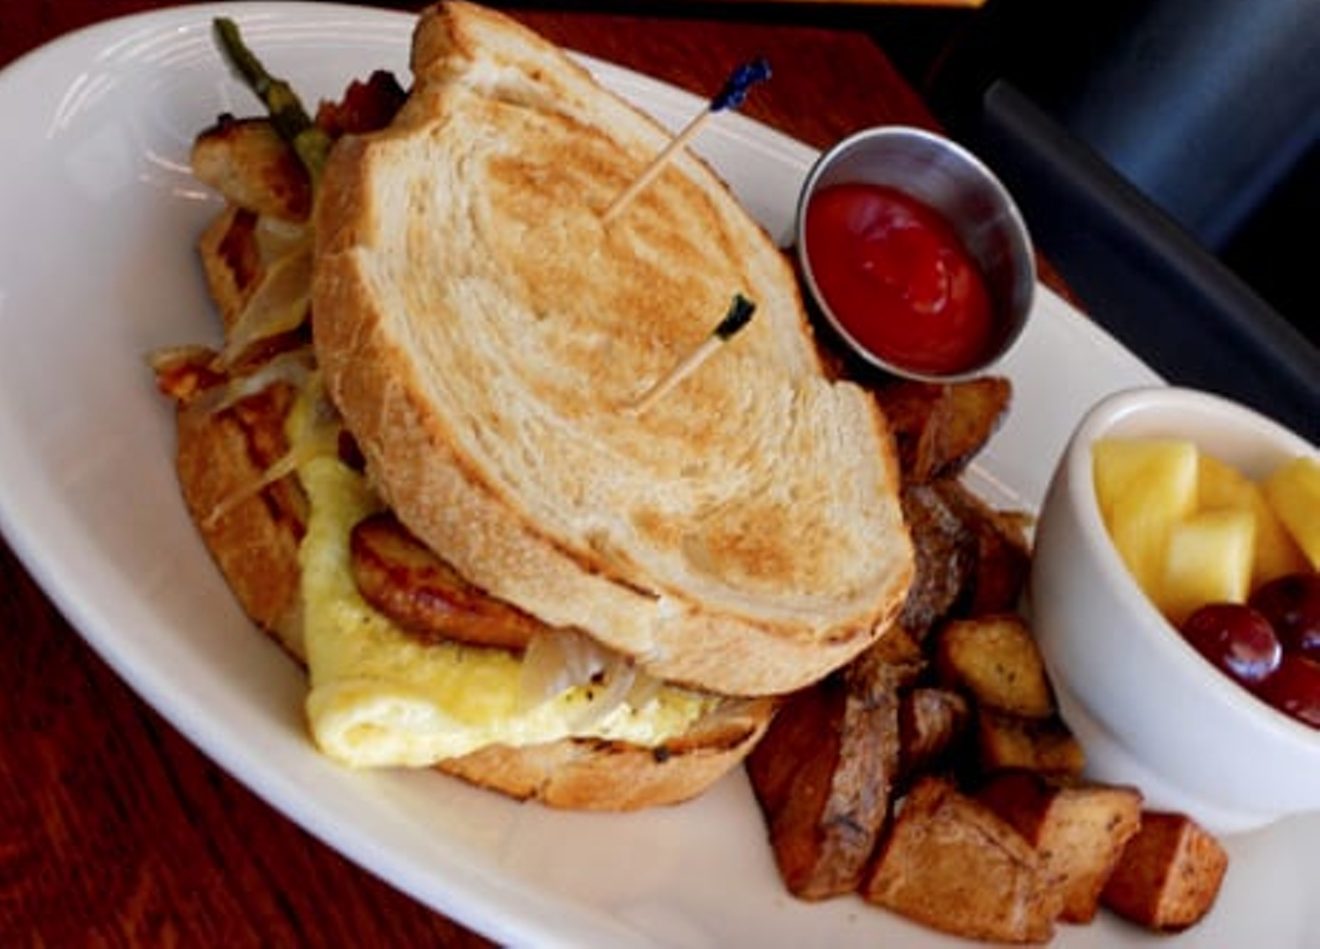 The Hangover Breakfast Sandwich at Daily Dose